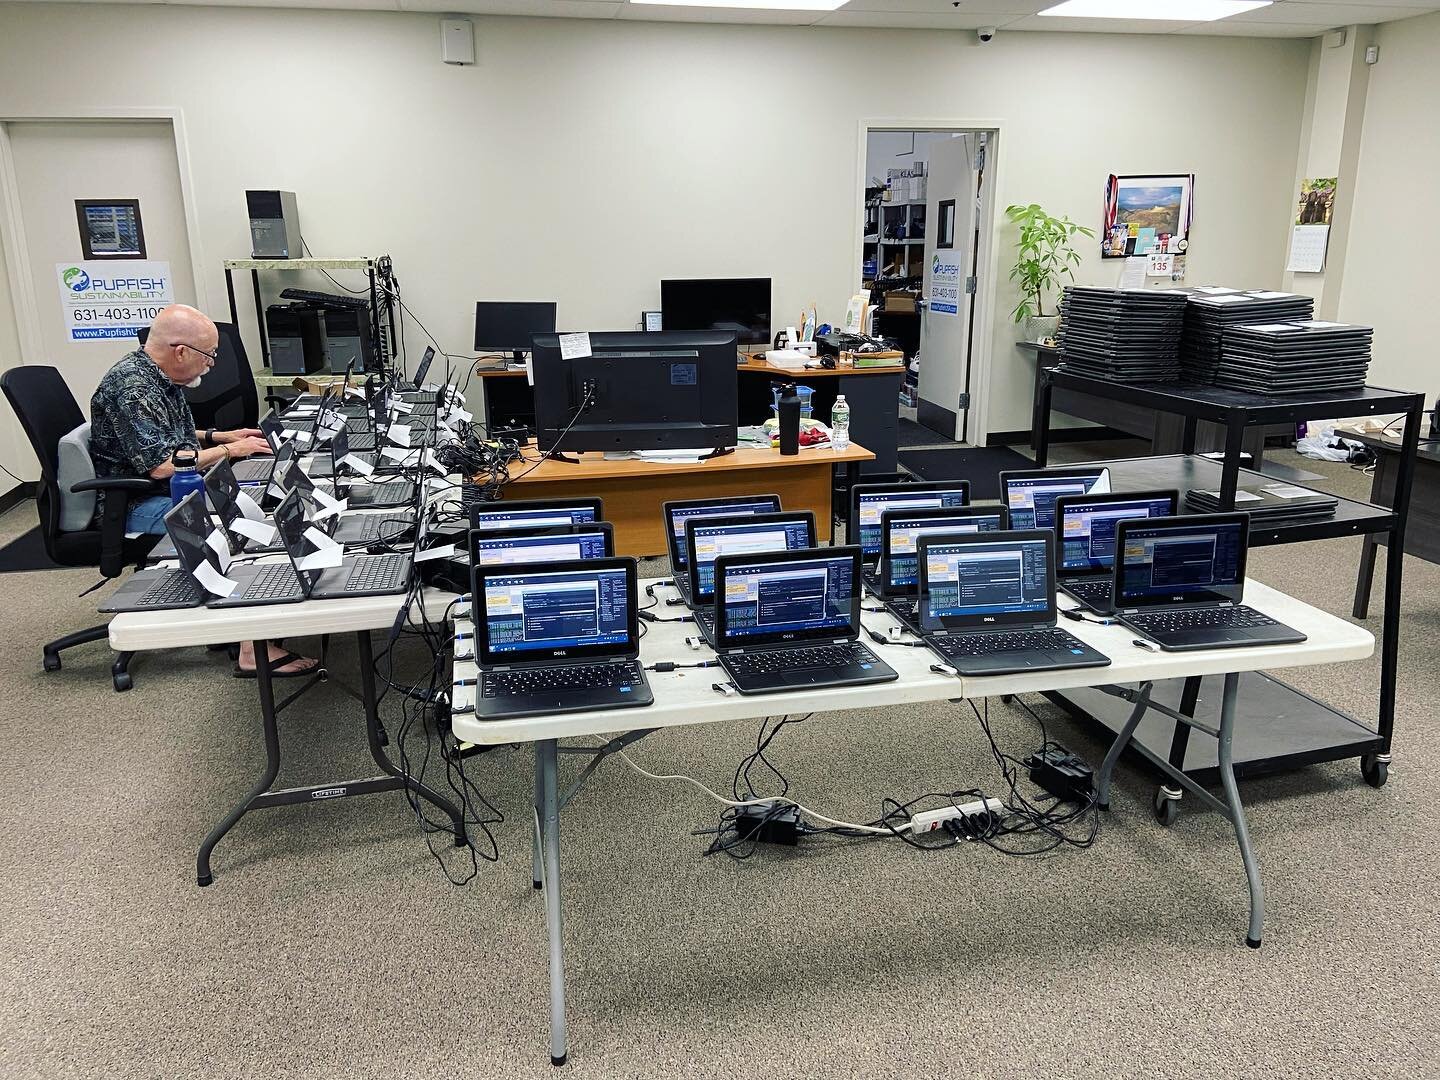 These laptops are lined up and getting ready for a NEW LIFE! Repurposing electronics (adapting them for new or different use) is the most environmentally friendly way to deal with slightly outdated or unwanted devices. Our data access team ensures th